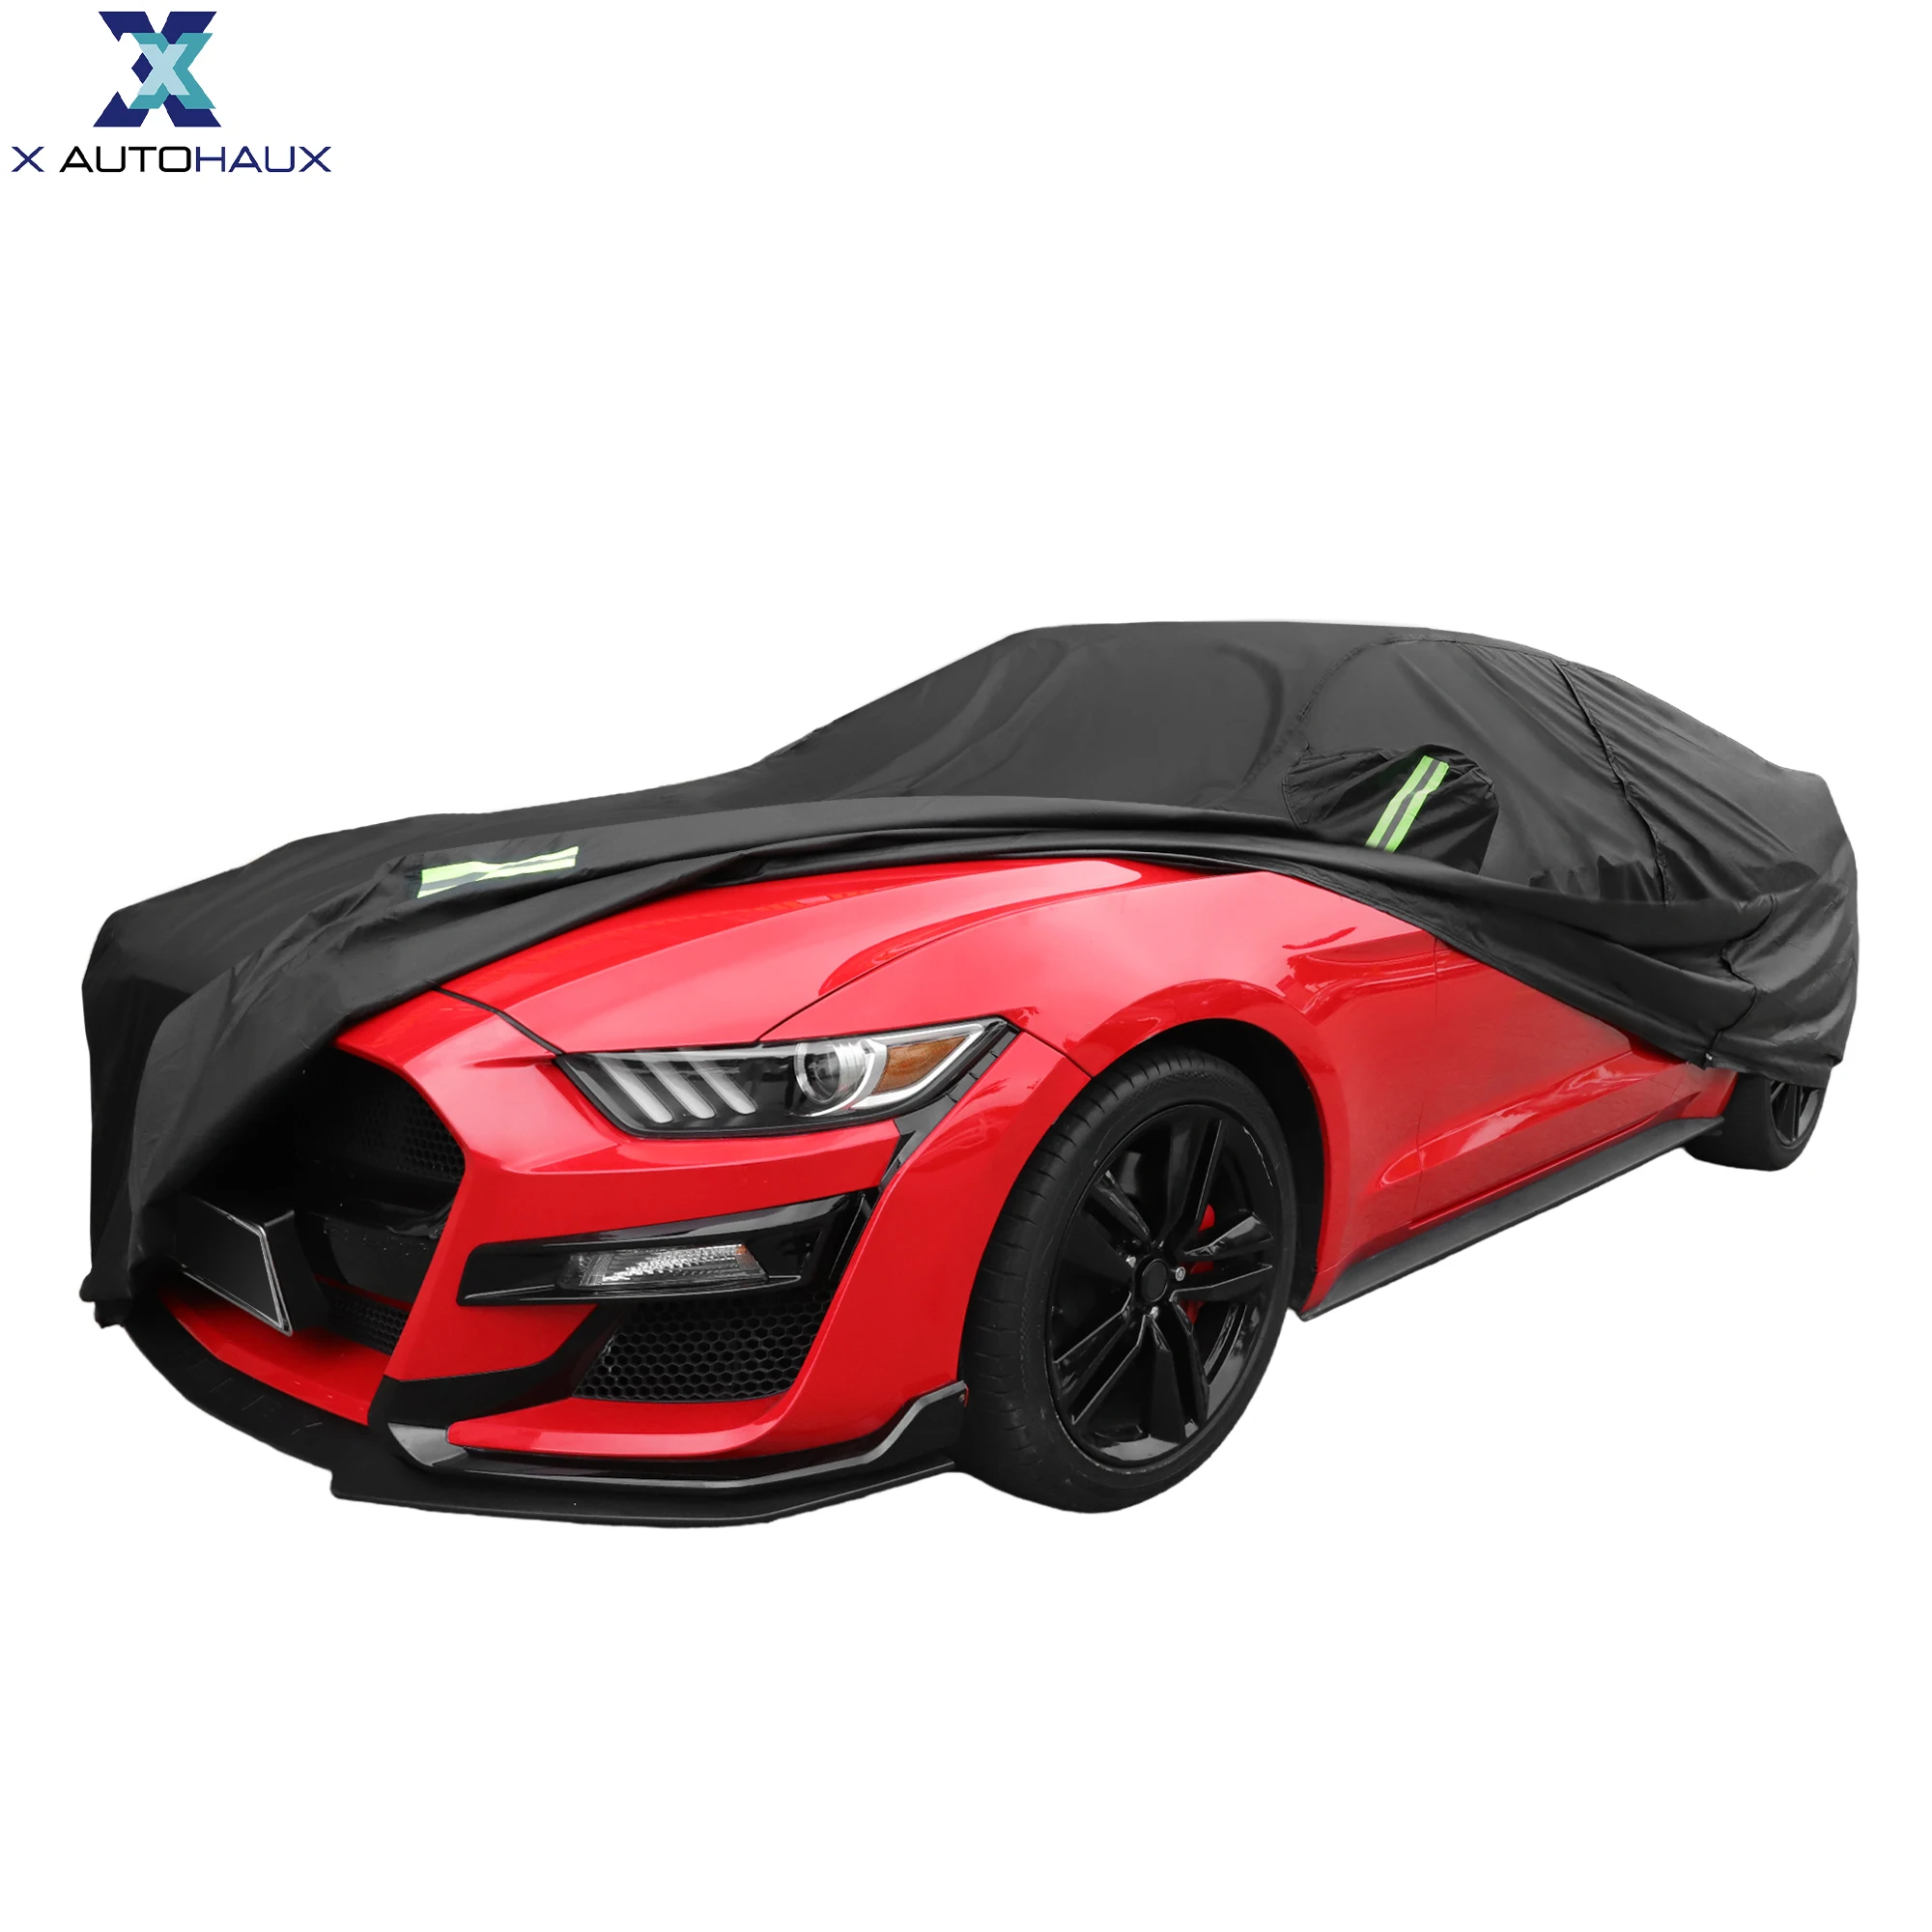 X Autohaux SUV Car Cover for Ford for Mustang GT/Bullitt/ECOBOOST 1994-2021 - $104.61